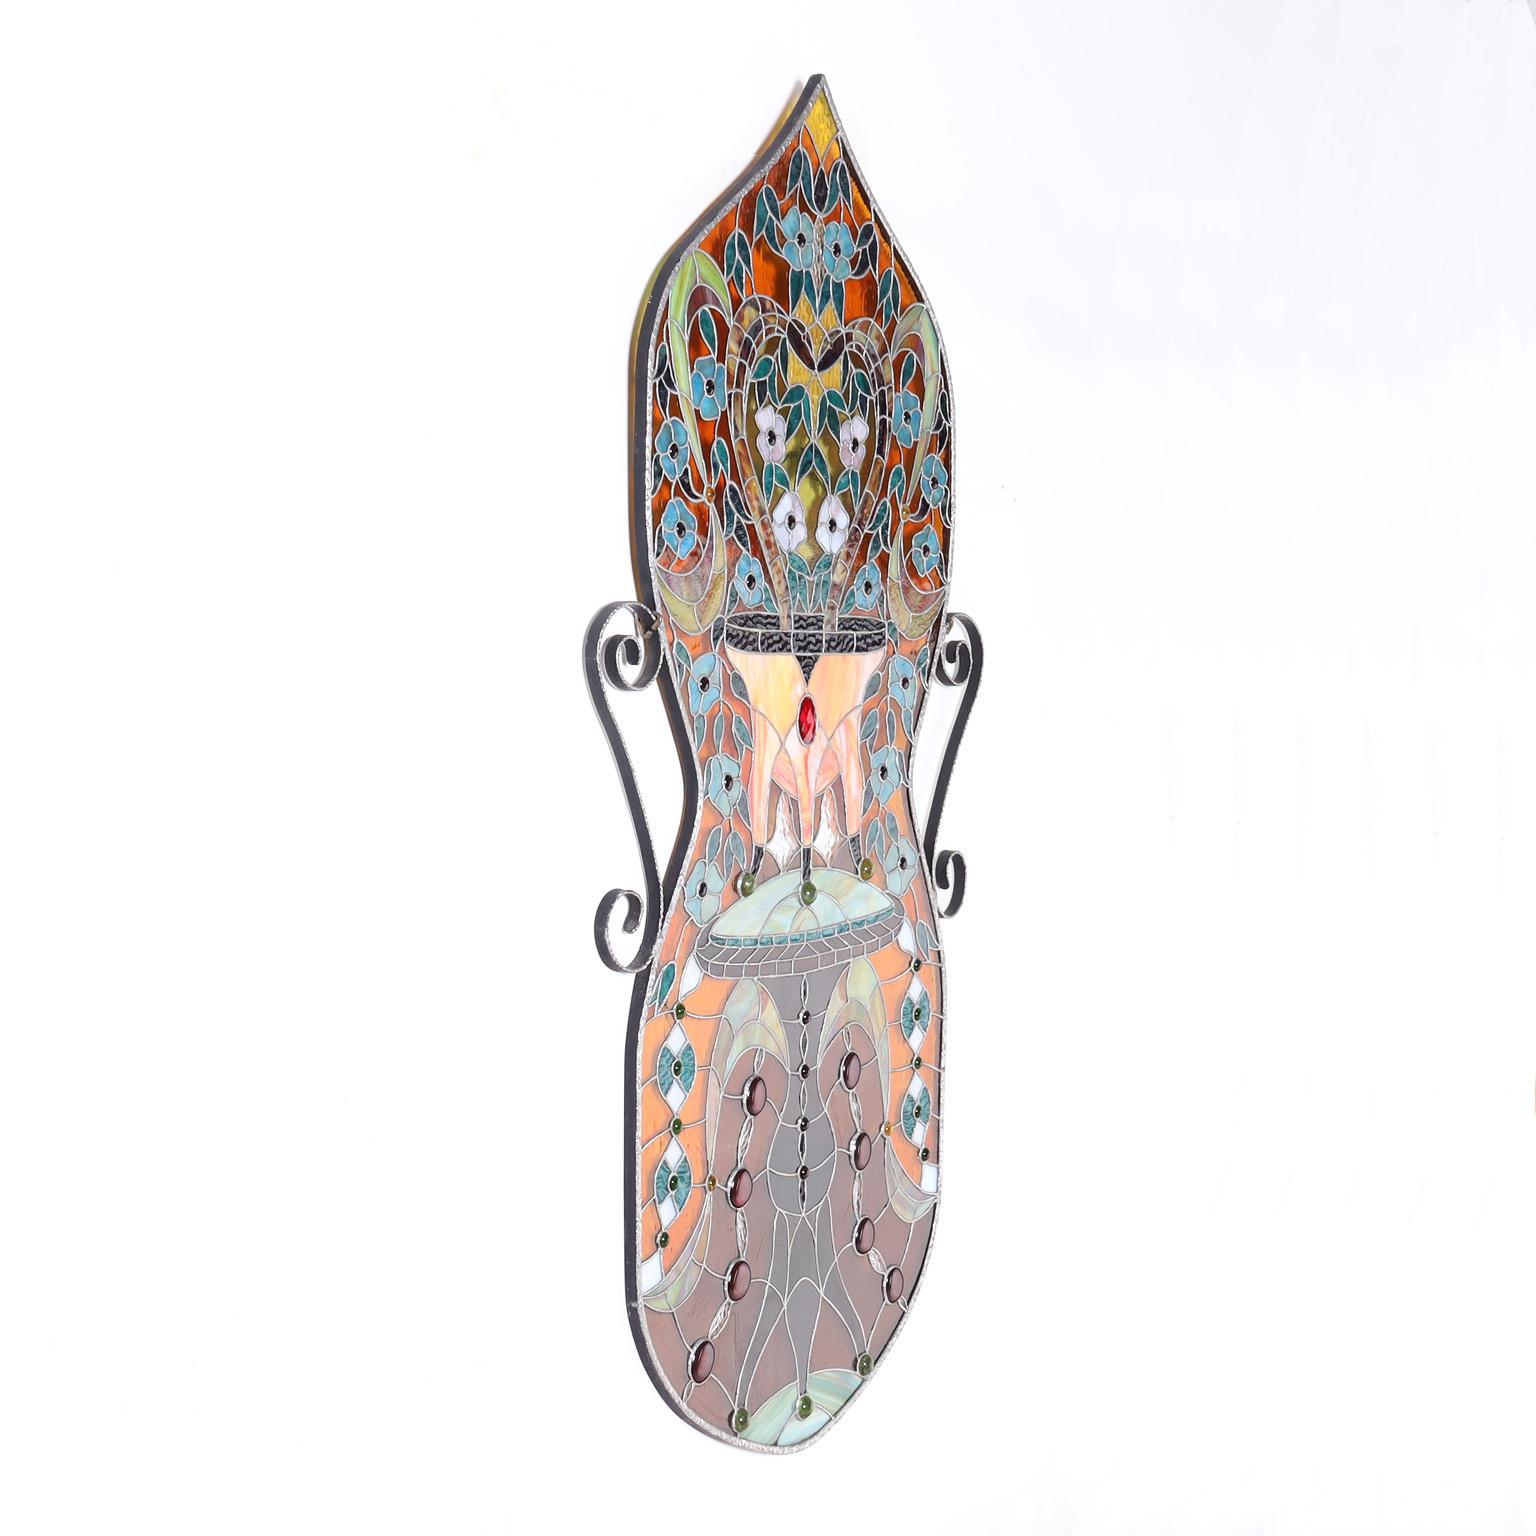 Striking stained glass panel hand crafted in an hourglass form in alluring vivid colors and highlighted with jewels in a festive floral motif.